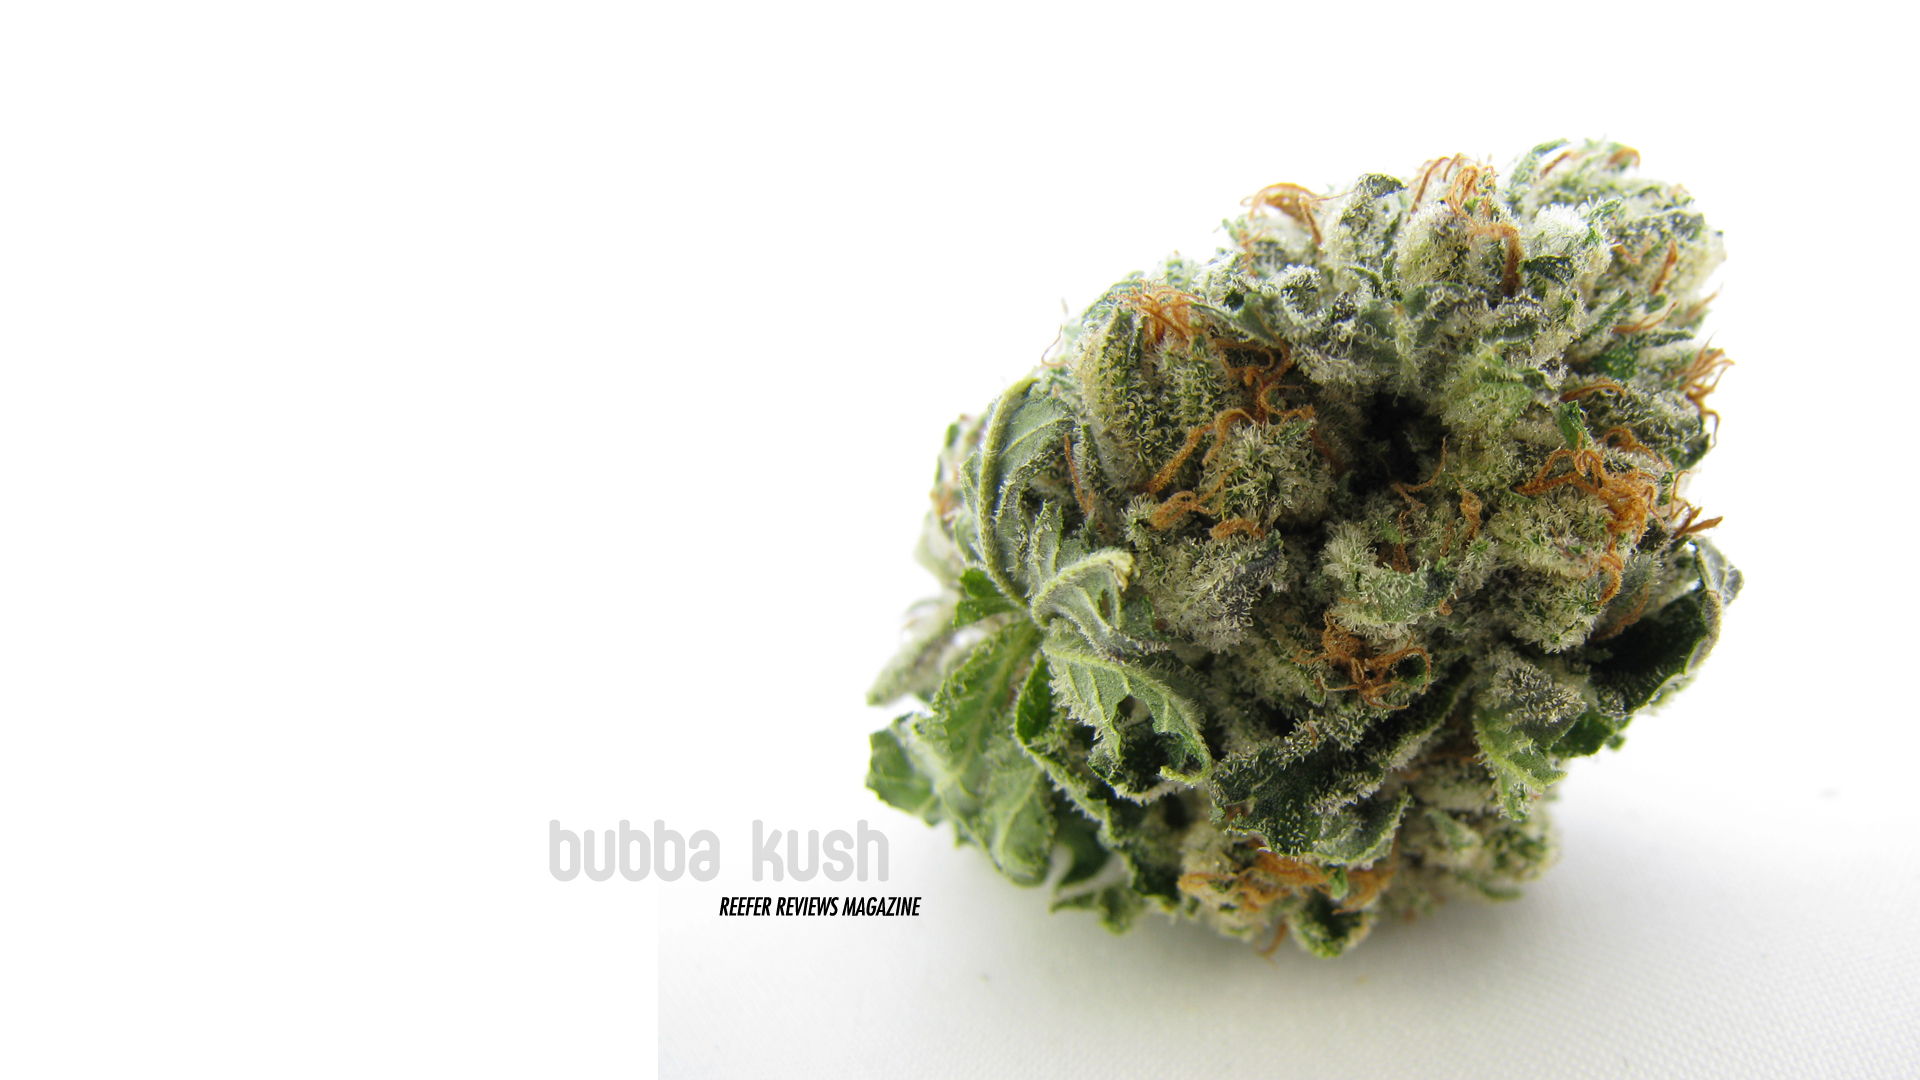 Wallpapers Kush Below To The Latest From Reefer Reviews Magazine